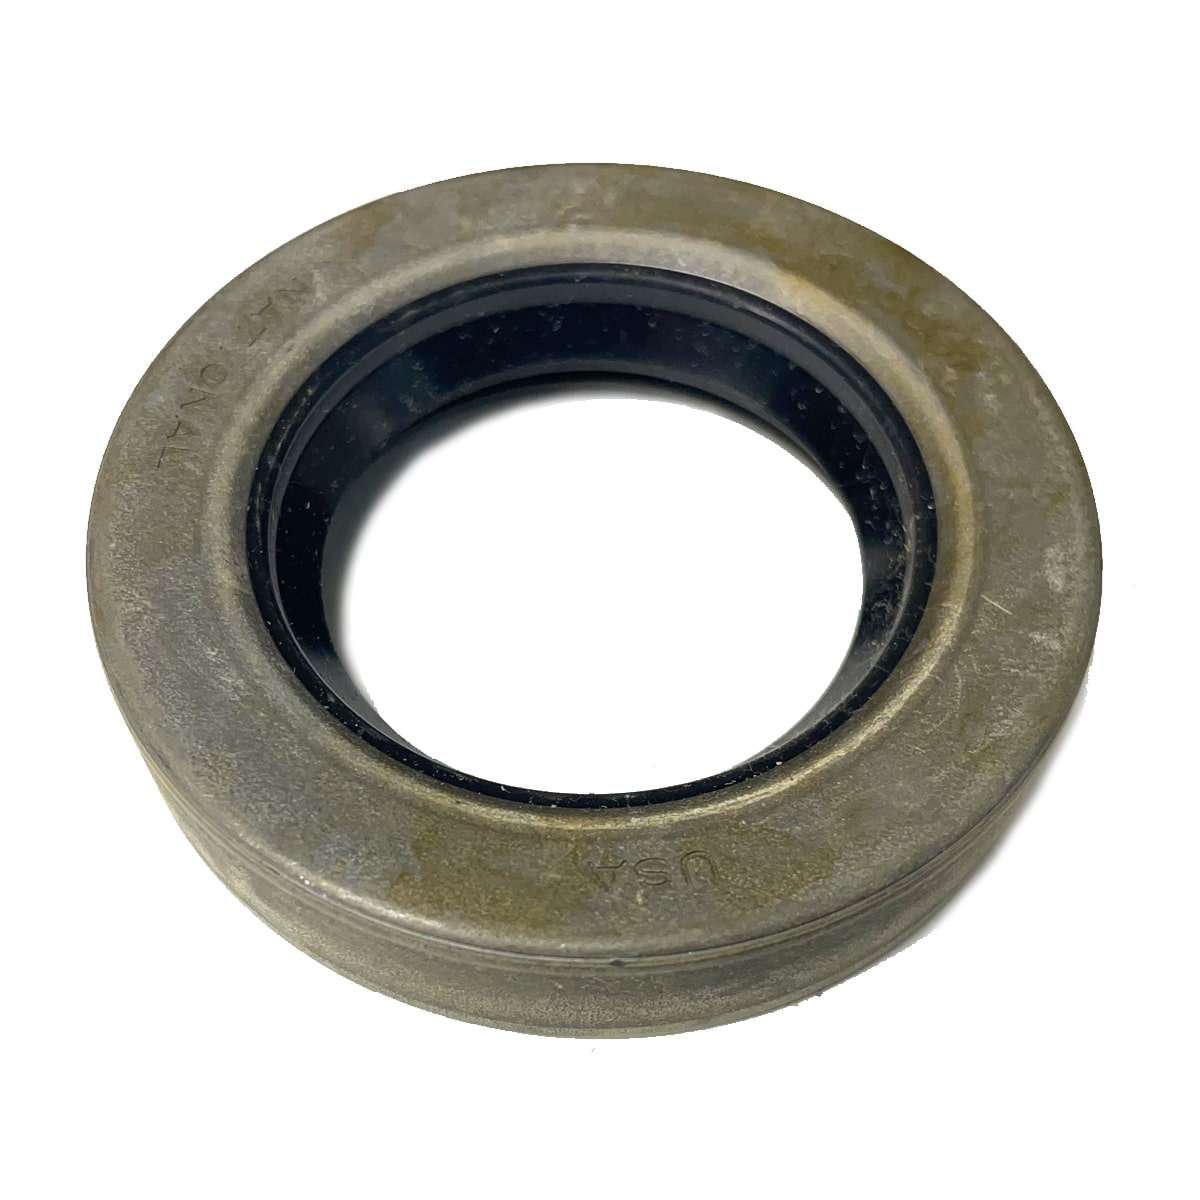 1958-1959 Wheel Seal Rear 1/2 Ton W/Positraction Chevrolet and GMC Pickup Truck